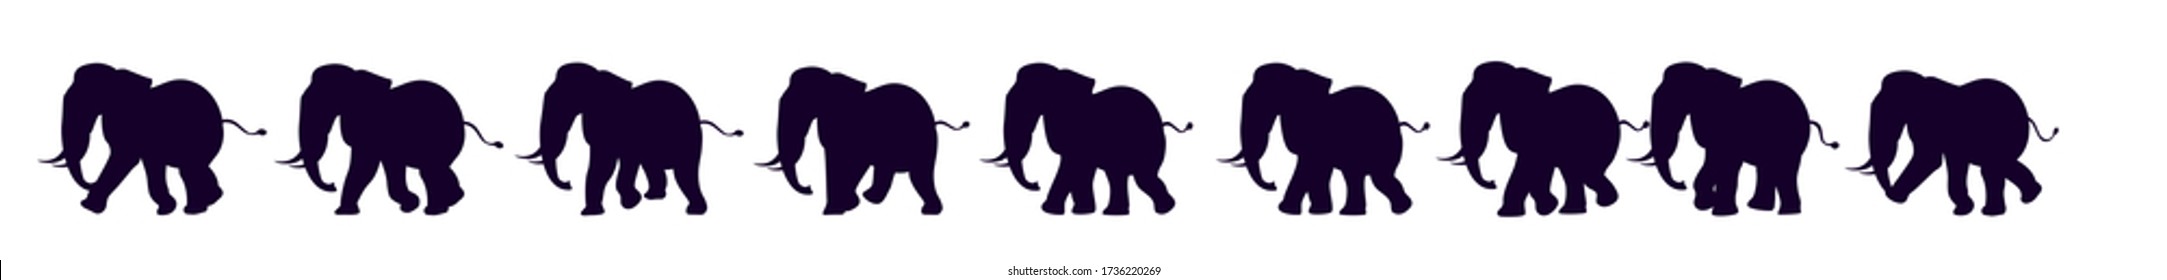 Full Cycle Of Animaton Of Elephant.Black And White Silhouette, 2d Character.